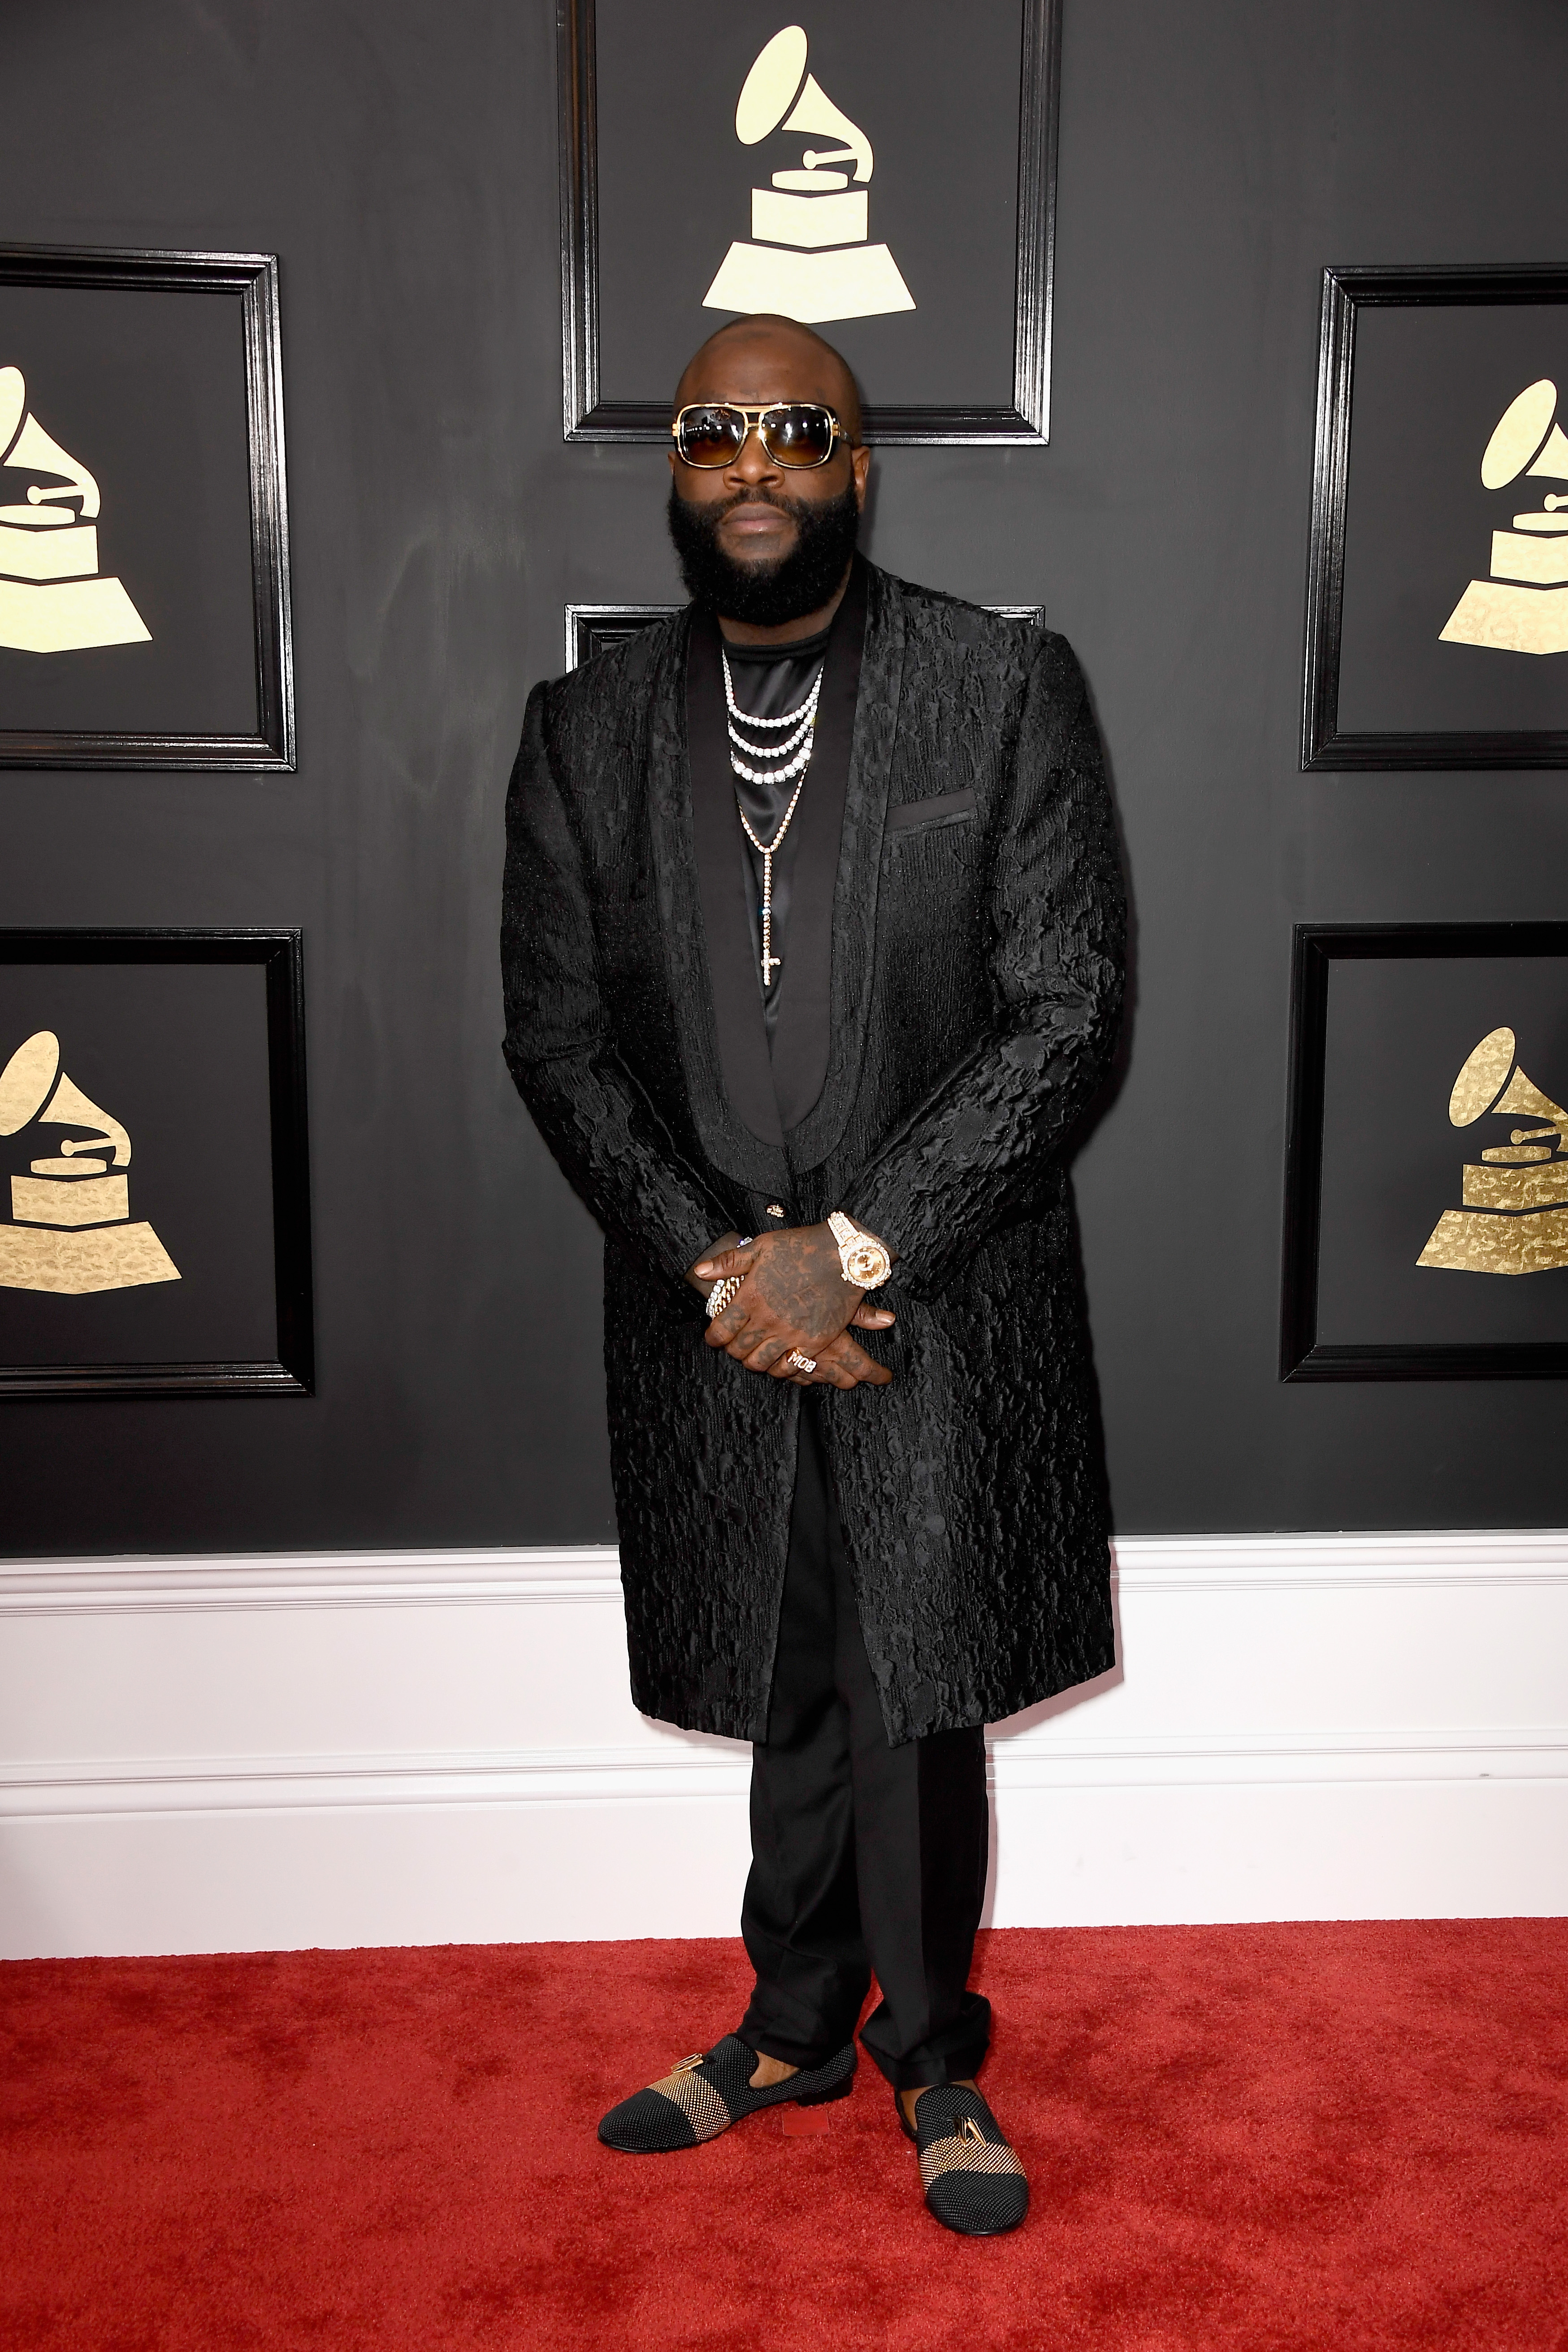 LOS ANGELES, CA - FEBRUARY 12: Rapper Rick Ross attends The 59th GRAMMY Awards at STAPLES Center on February 12, 2017 in Los Angeles, California. Frazer Harrison/Getty Images/AFP